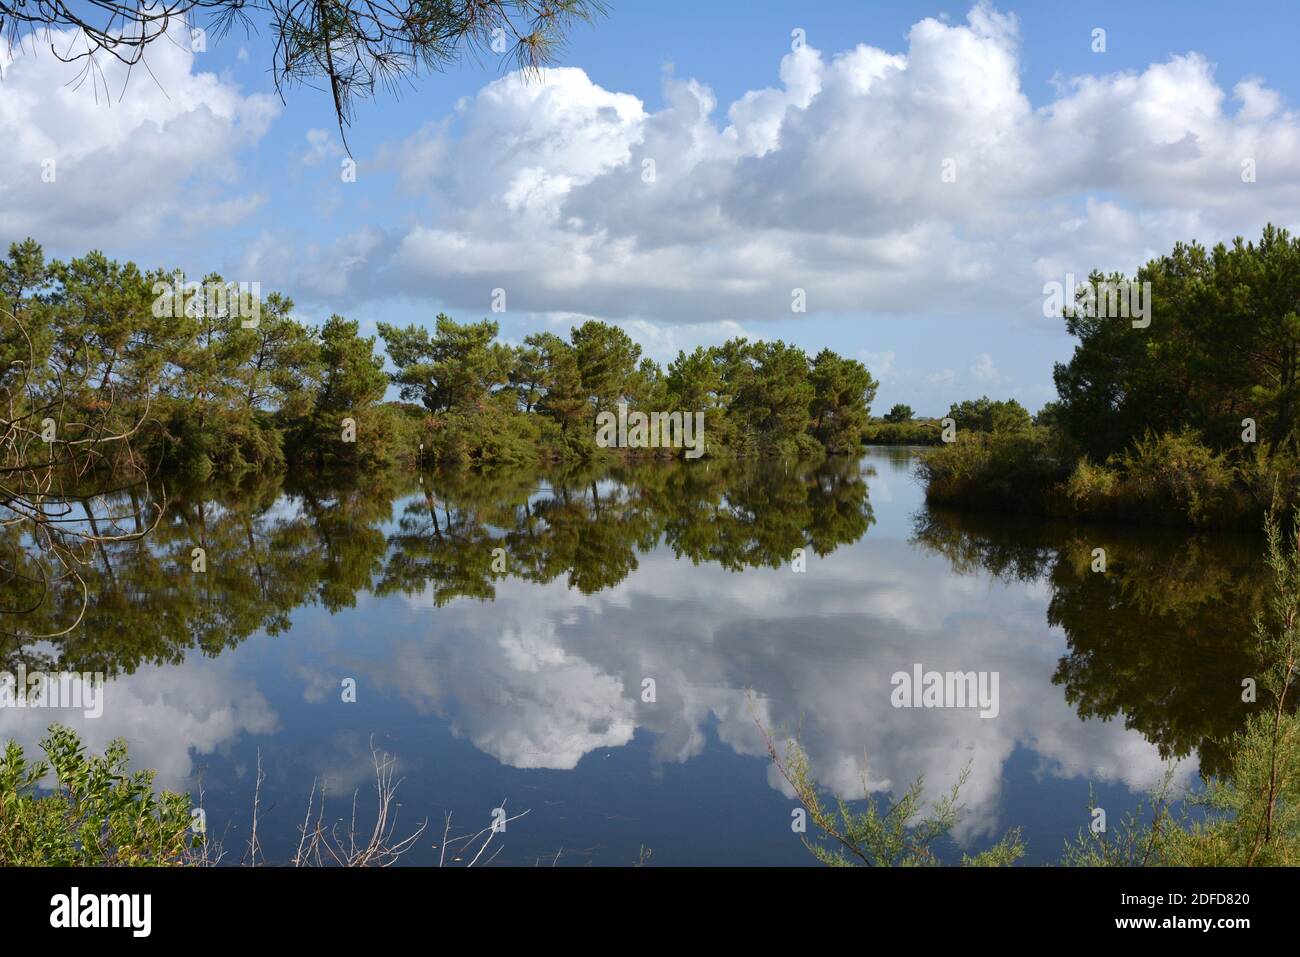 France, Aquitaine, Le Teich, a marine pond  in the Arcachon bay with magnificent reflections of the clouds and the trees in the water. Stock Photo